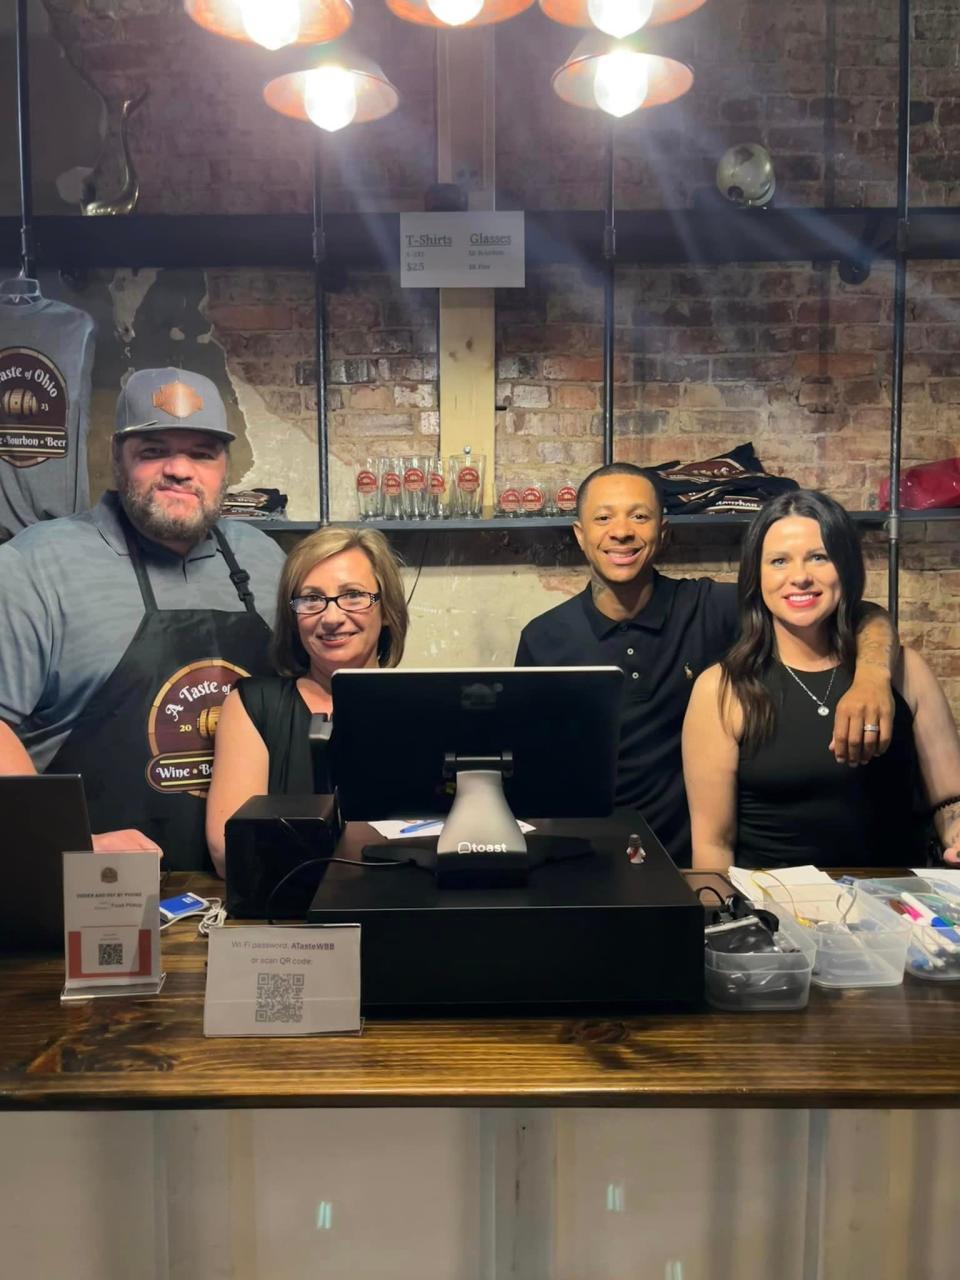 Joseph and Angela Bailey along with Kenneth and Tessa Dickinson, from left, are shown inside A Taste of Ohio, Wine, Bourbon & Beer. The self-serve lounge has been rolling through soft openings but will soon announce its grand opening date on its social media channels.